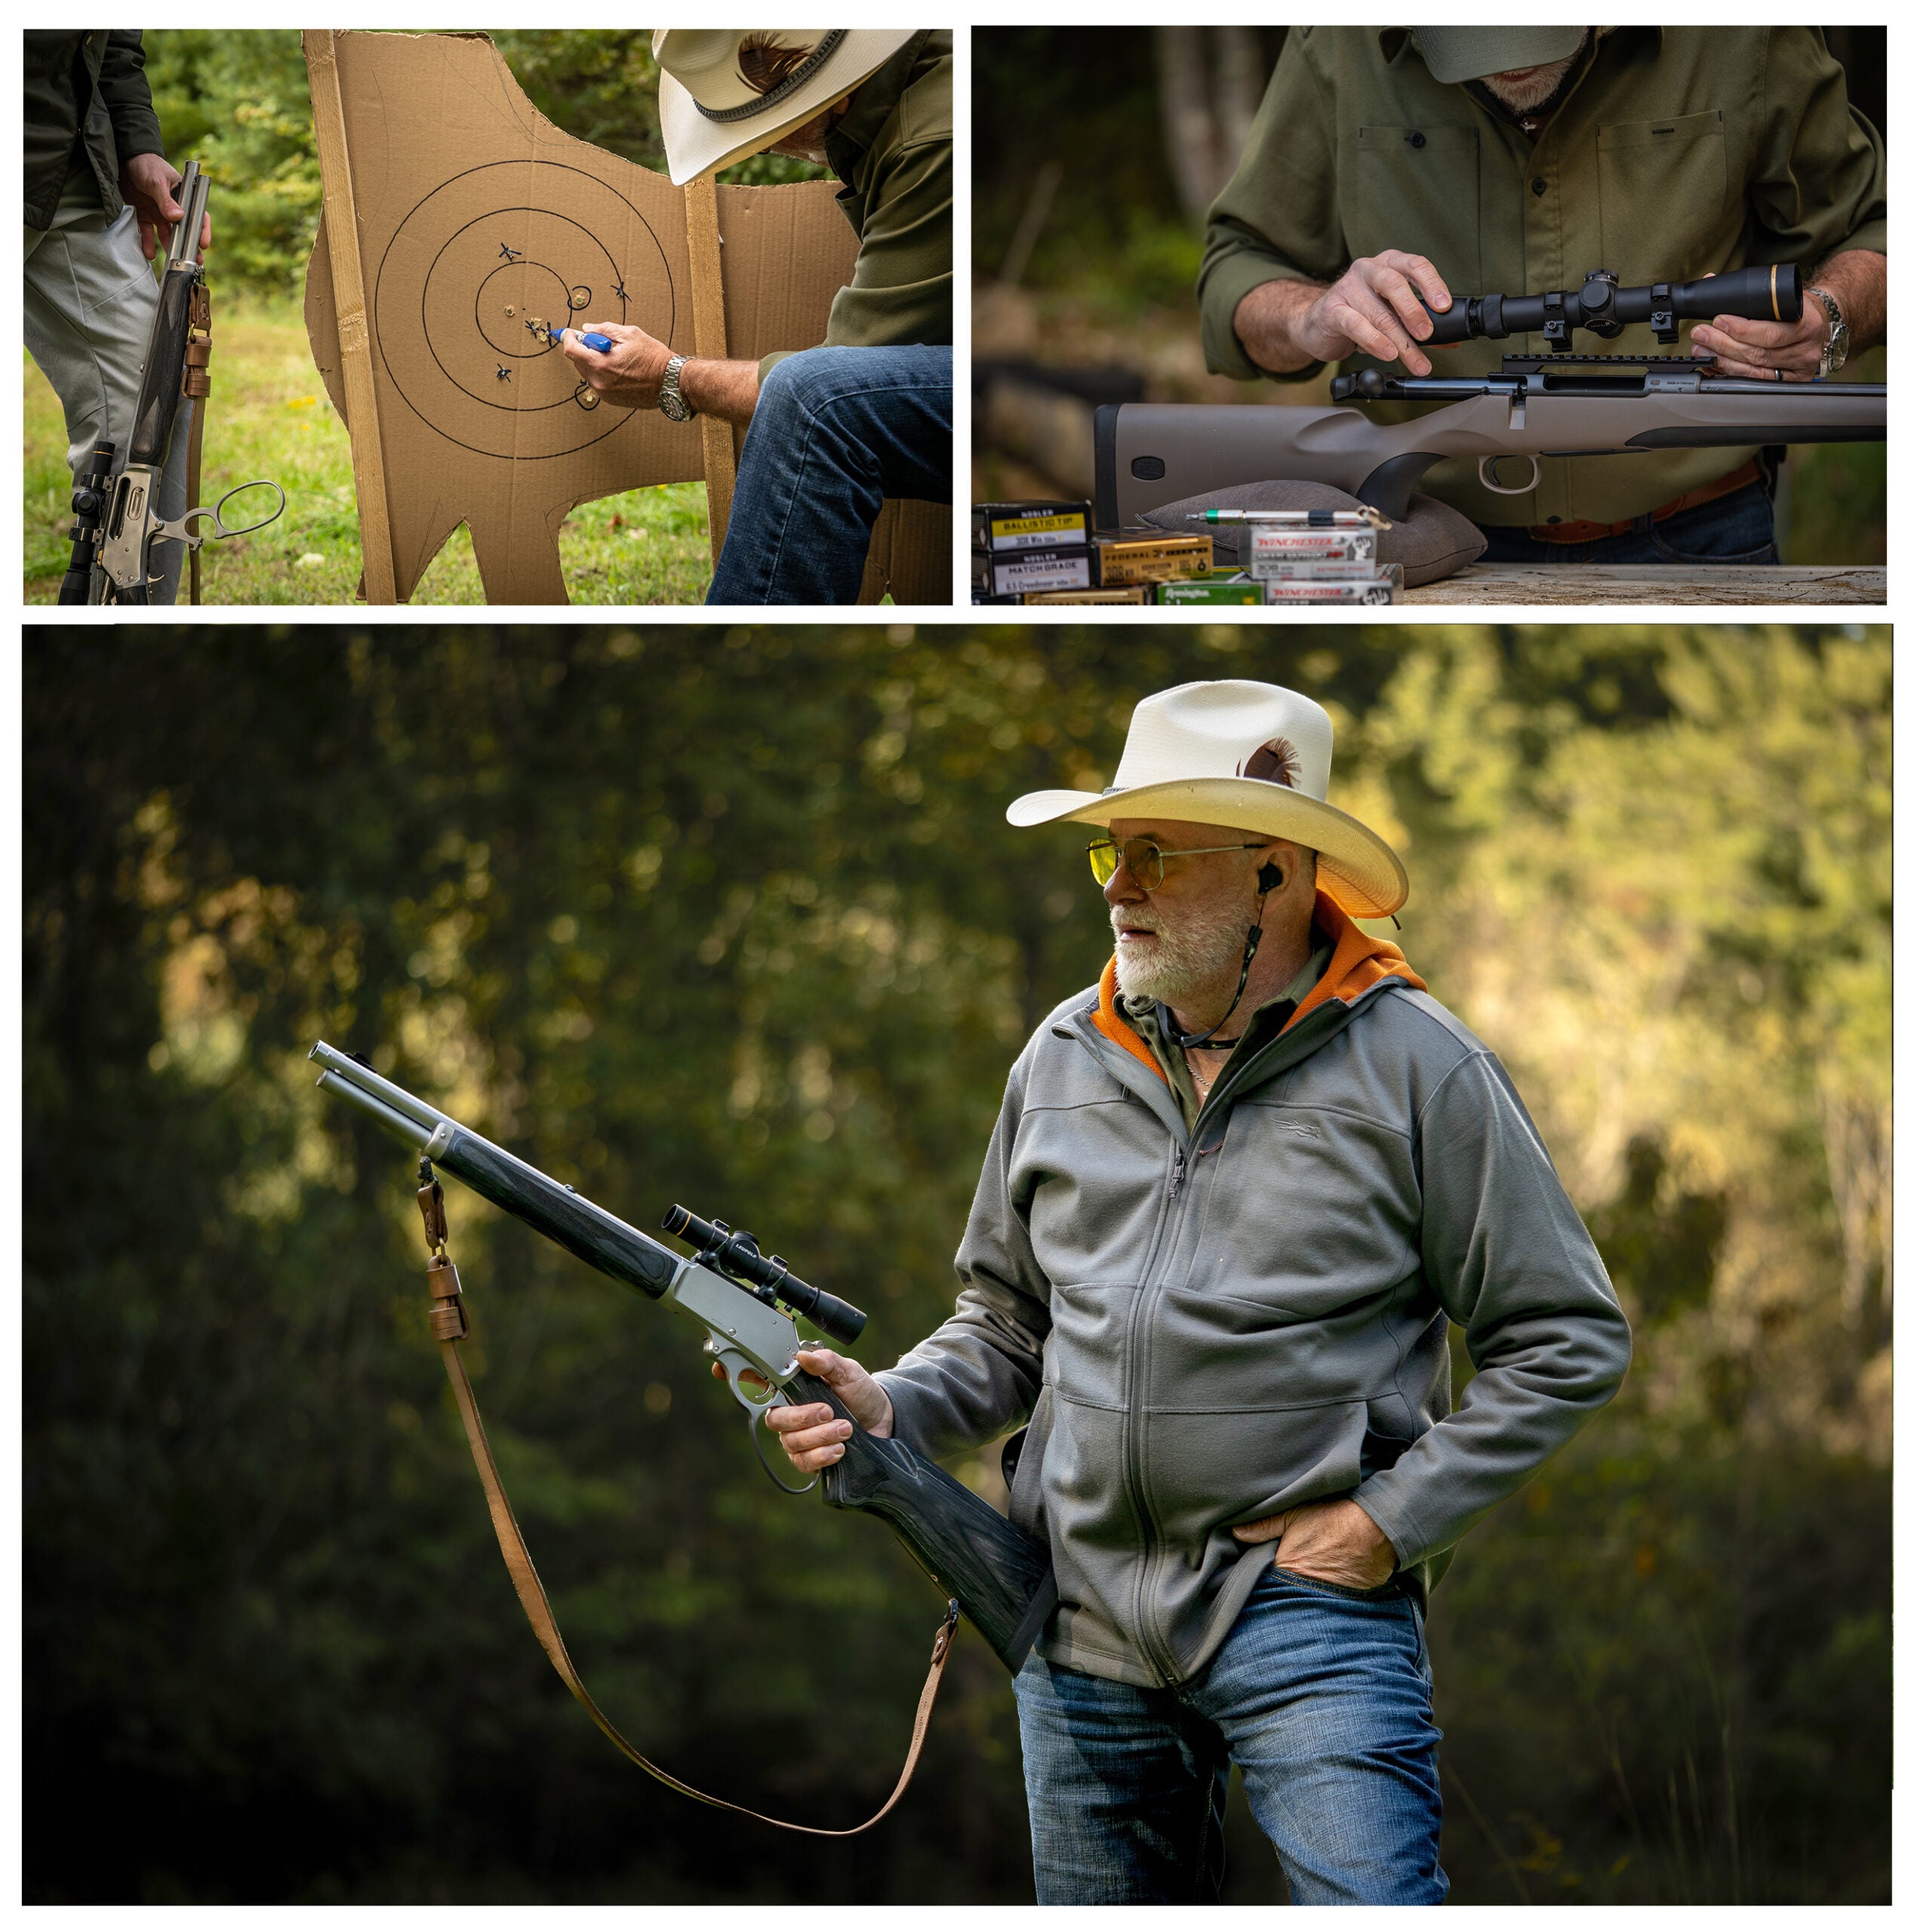 Collage of three photos from the 2022 Field & Stream Rifle Test.